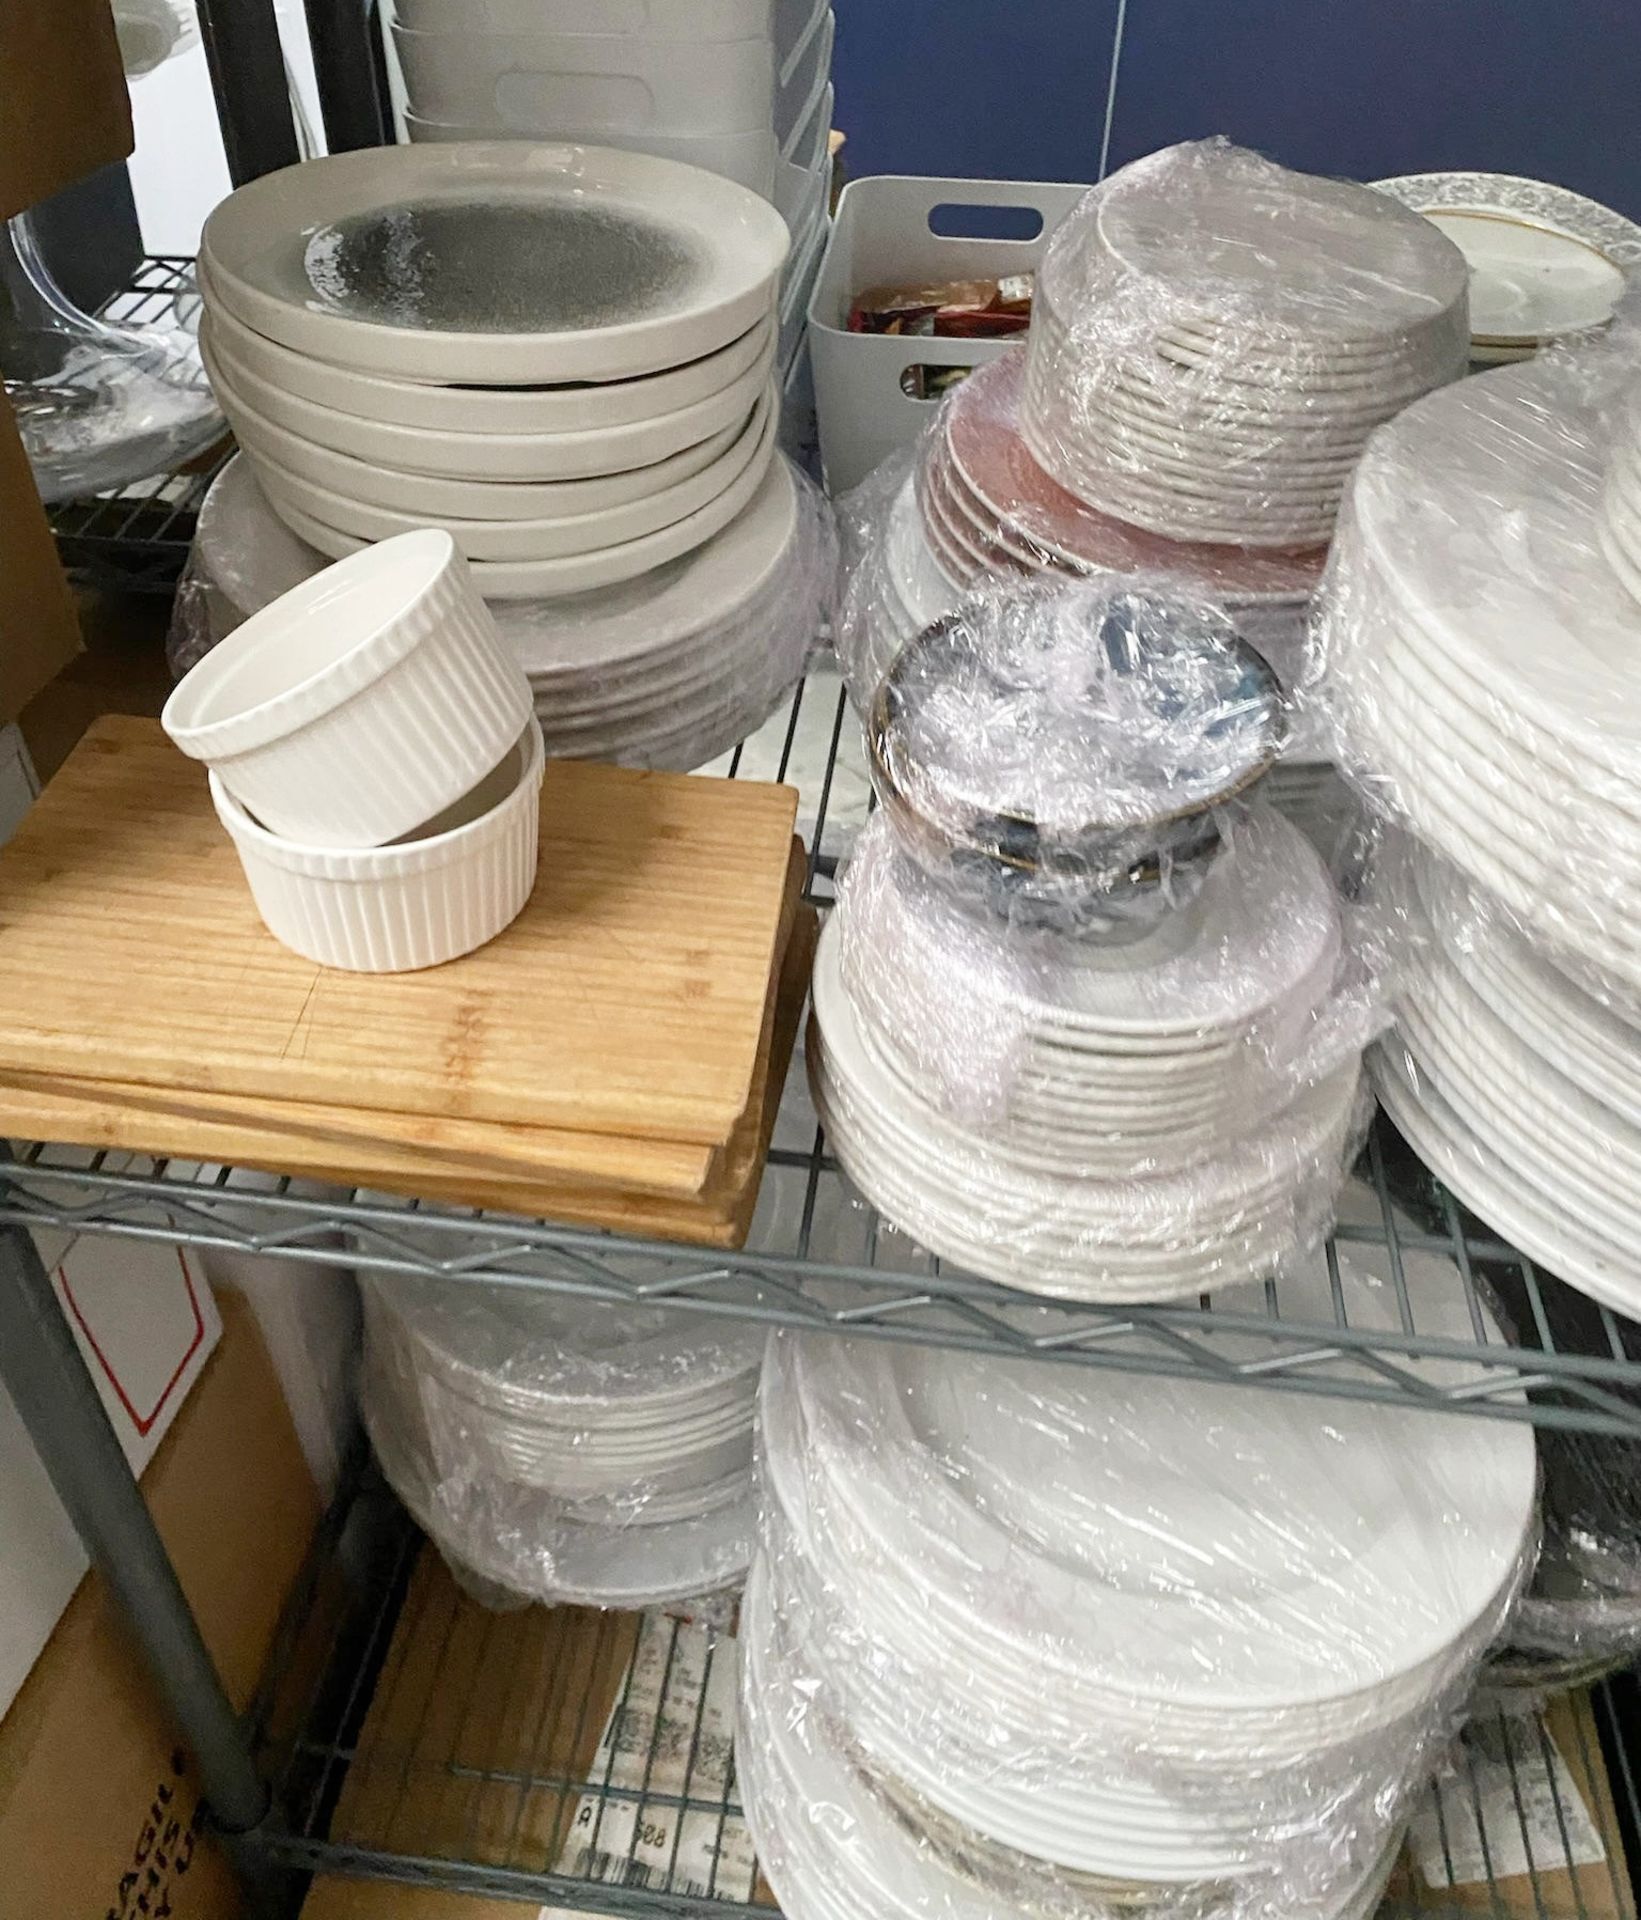 1 x Large Collection of Dinner Plates, Cake Stand, Slate Food Trays, Frying Baskets and More - Image 4 of 6